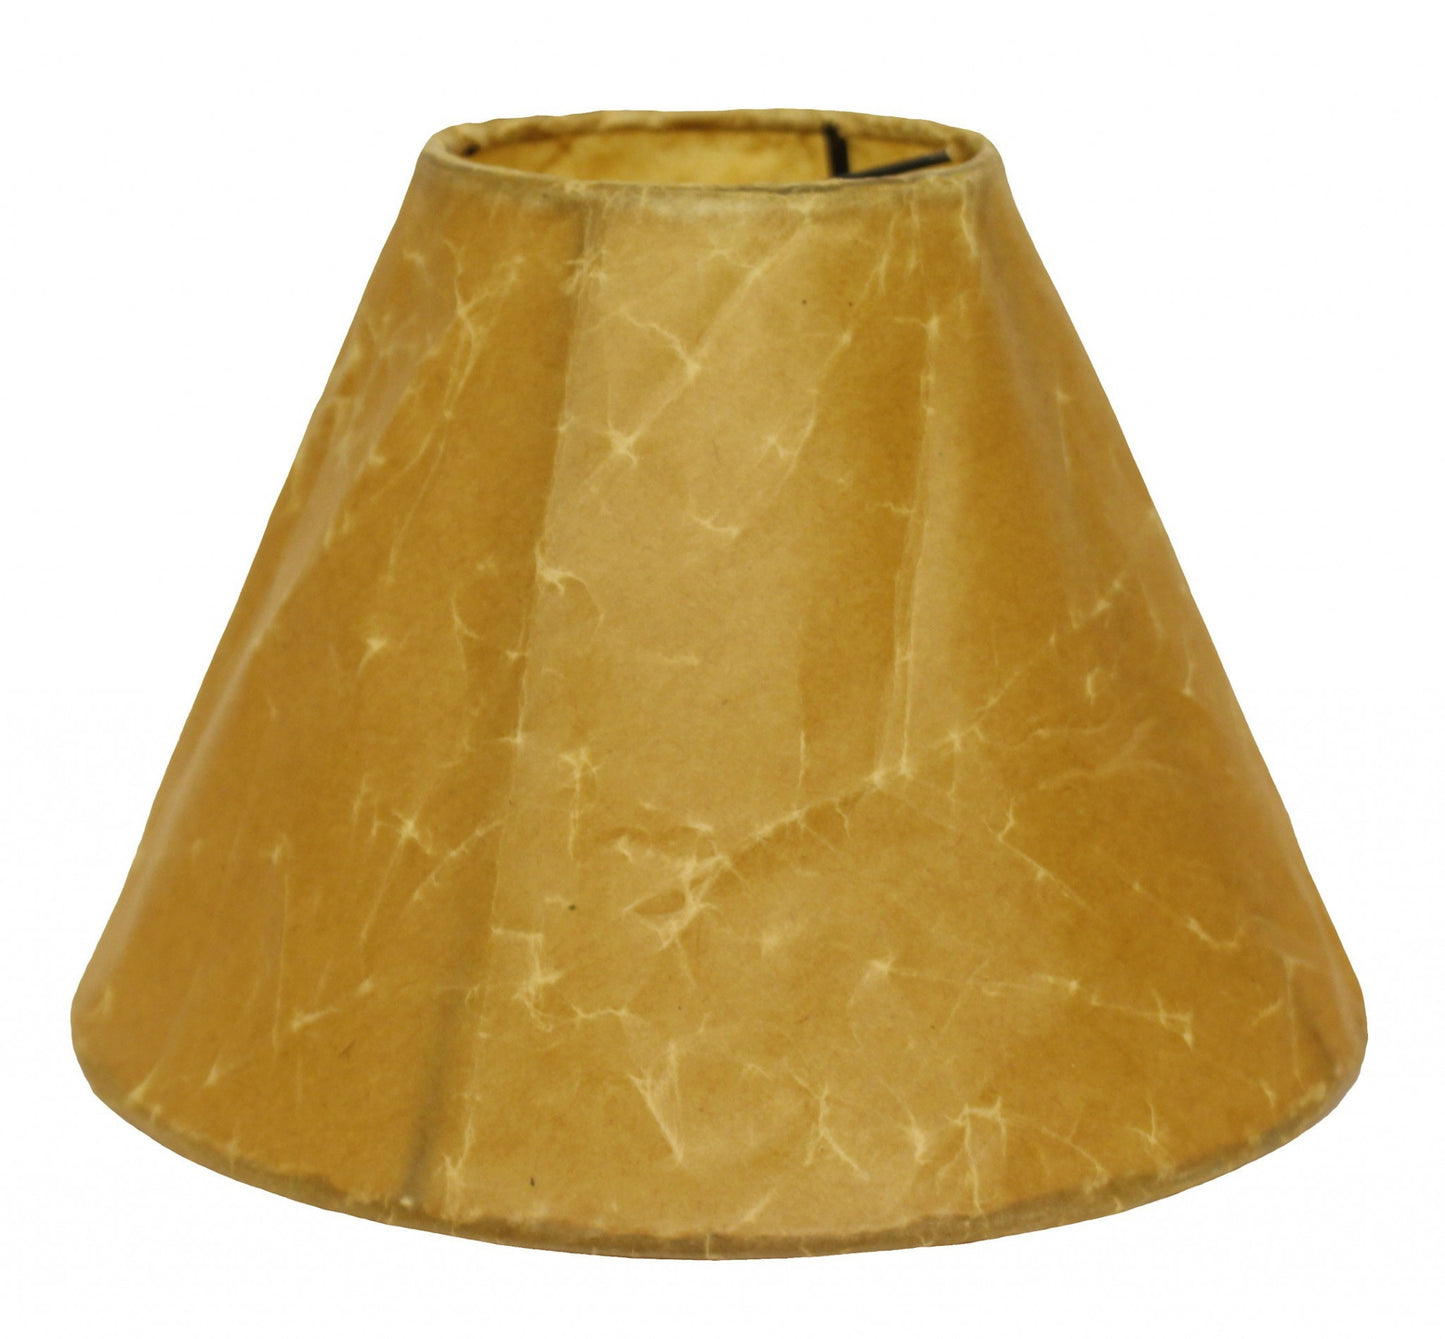 18" Brown Slanted Empire Crinkle Oil Paper Lampshade